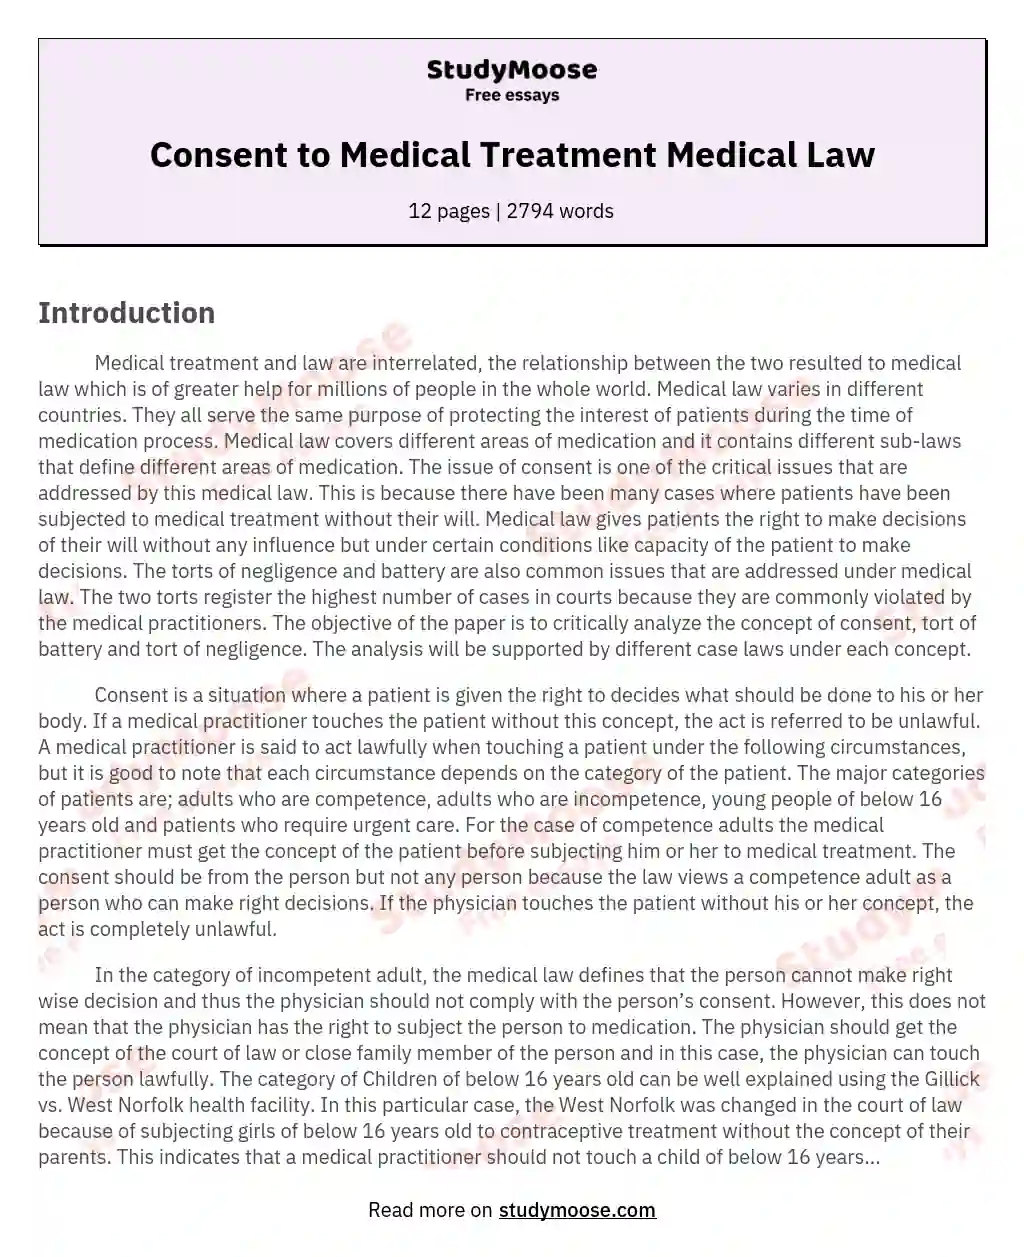 Consent to Medical Treatment Medical Law